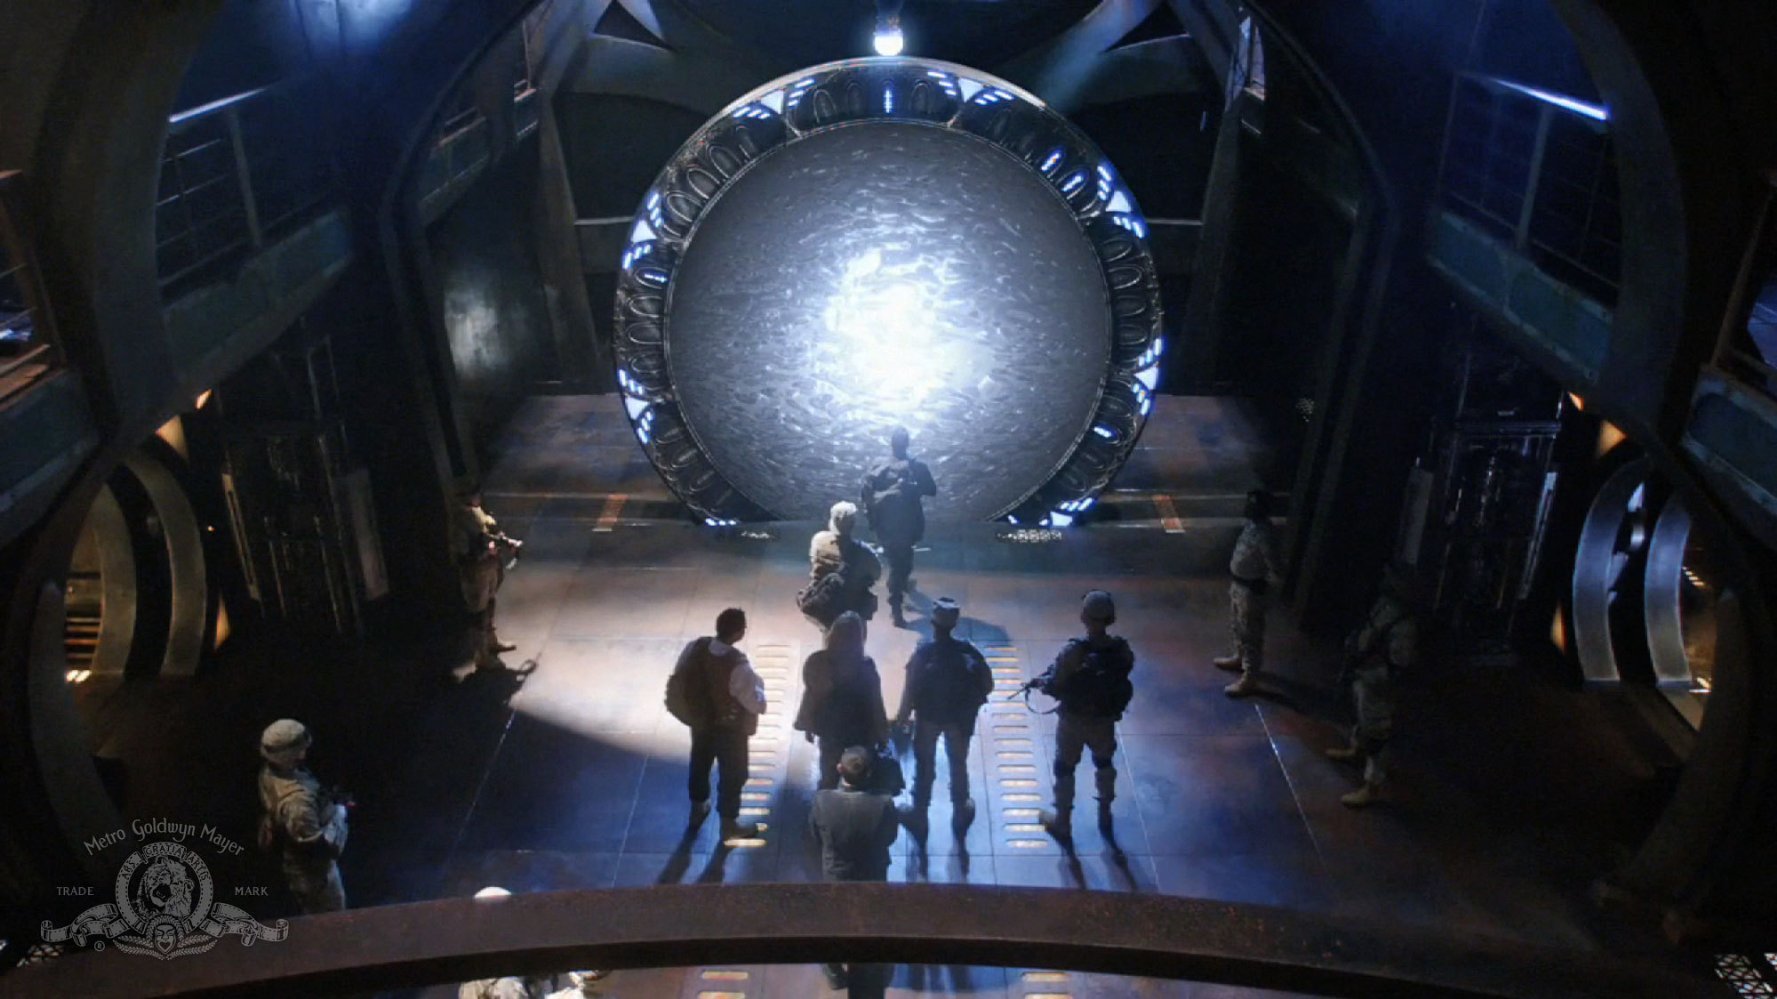 meet the physicist behind the science of stargate